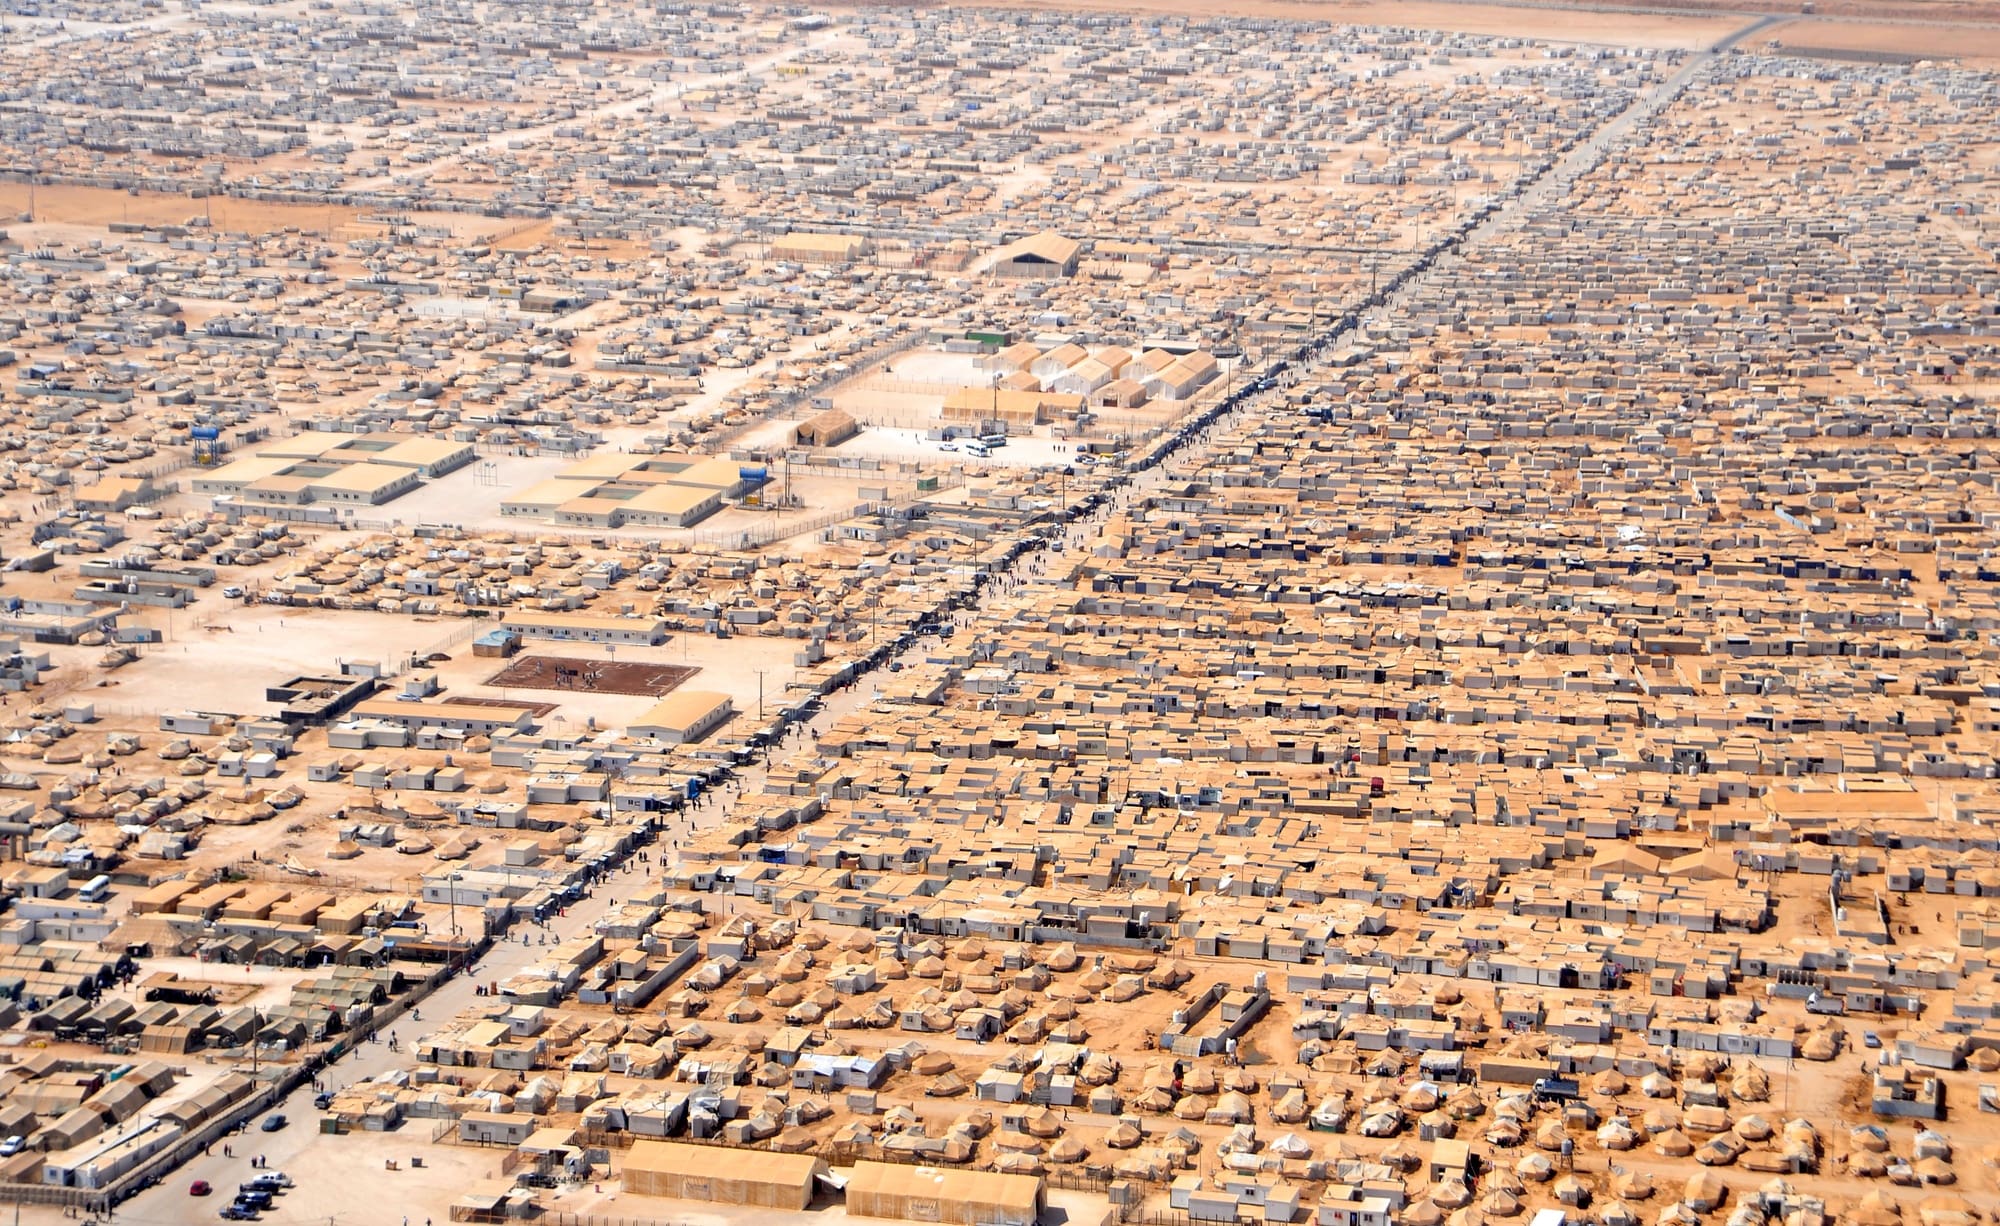 The Zaatari refugee camp in Jordan is the 2nd largest in the world